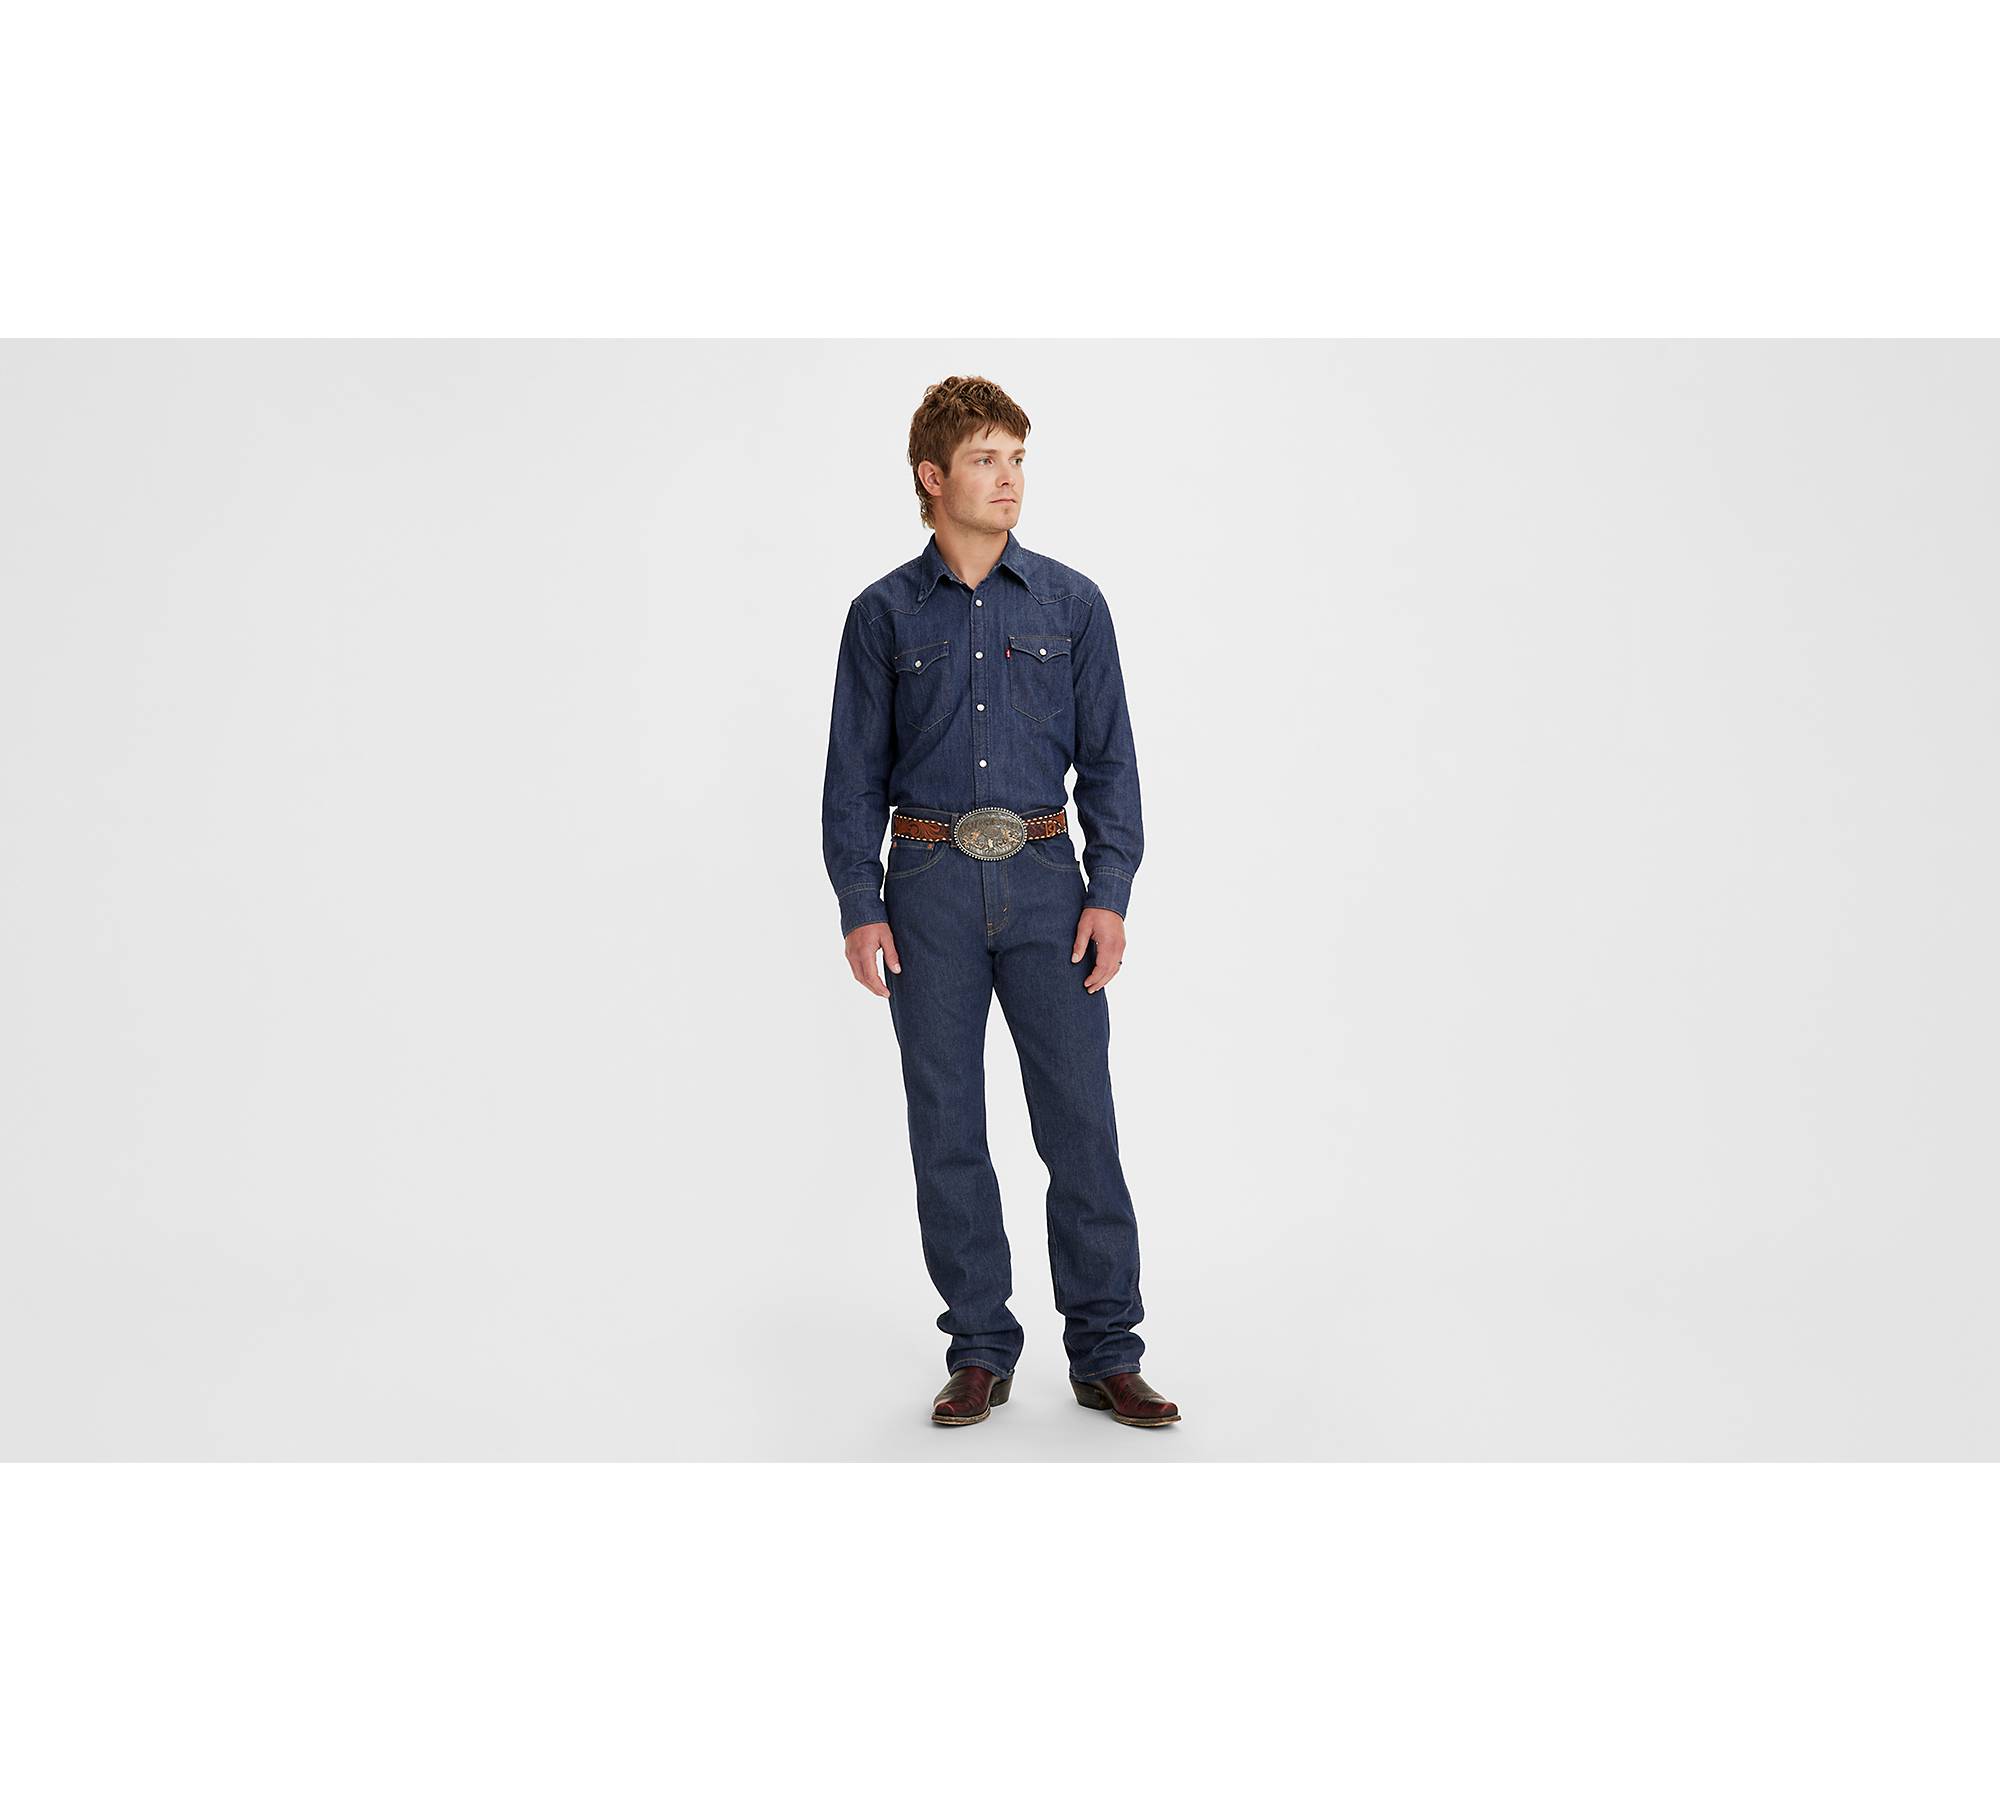 Wholesale Boys' Jeans from Manufacturers, Boys' Jeans Products at